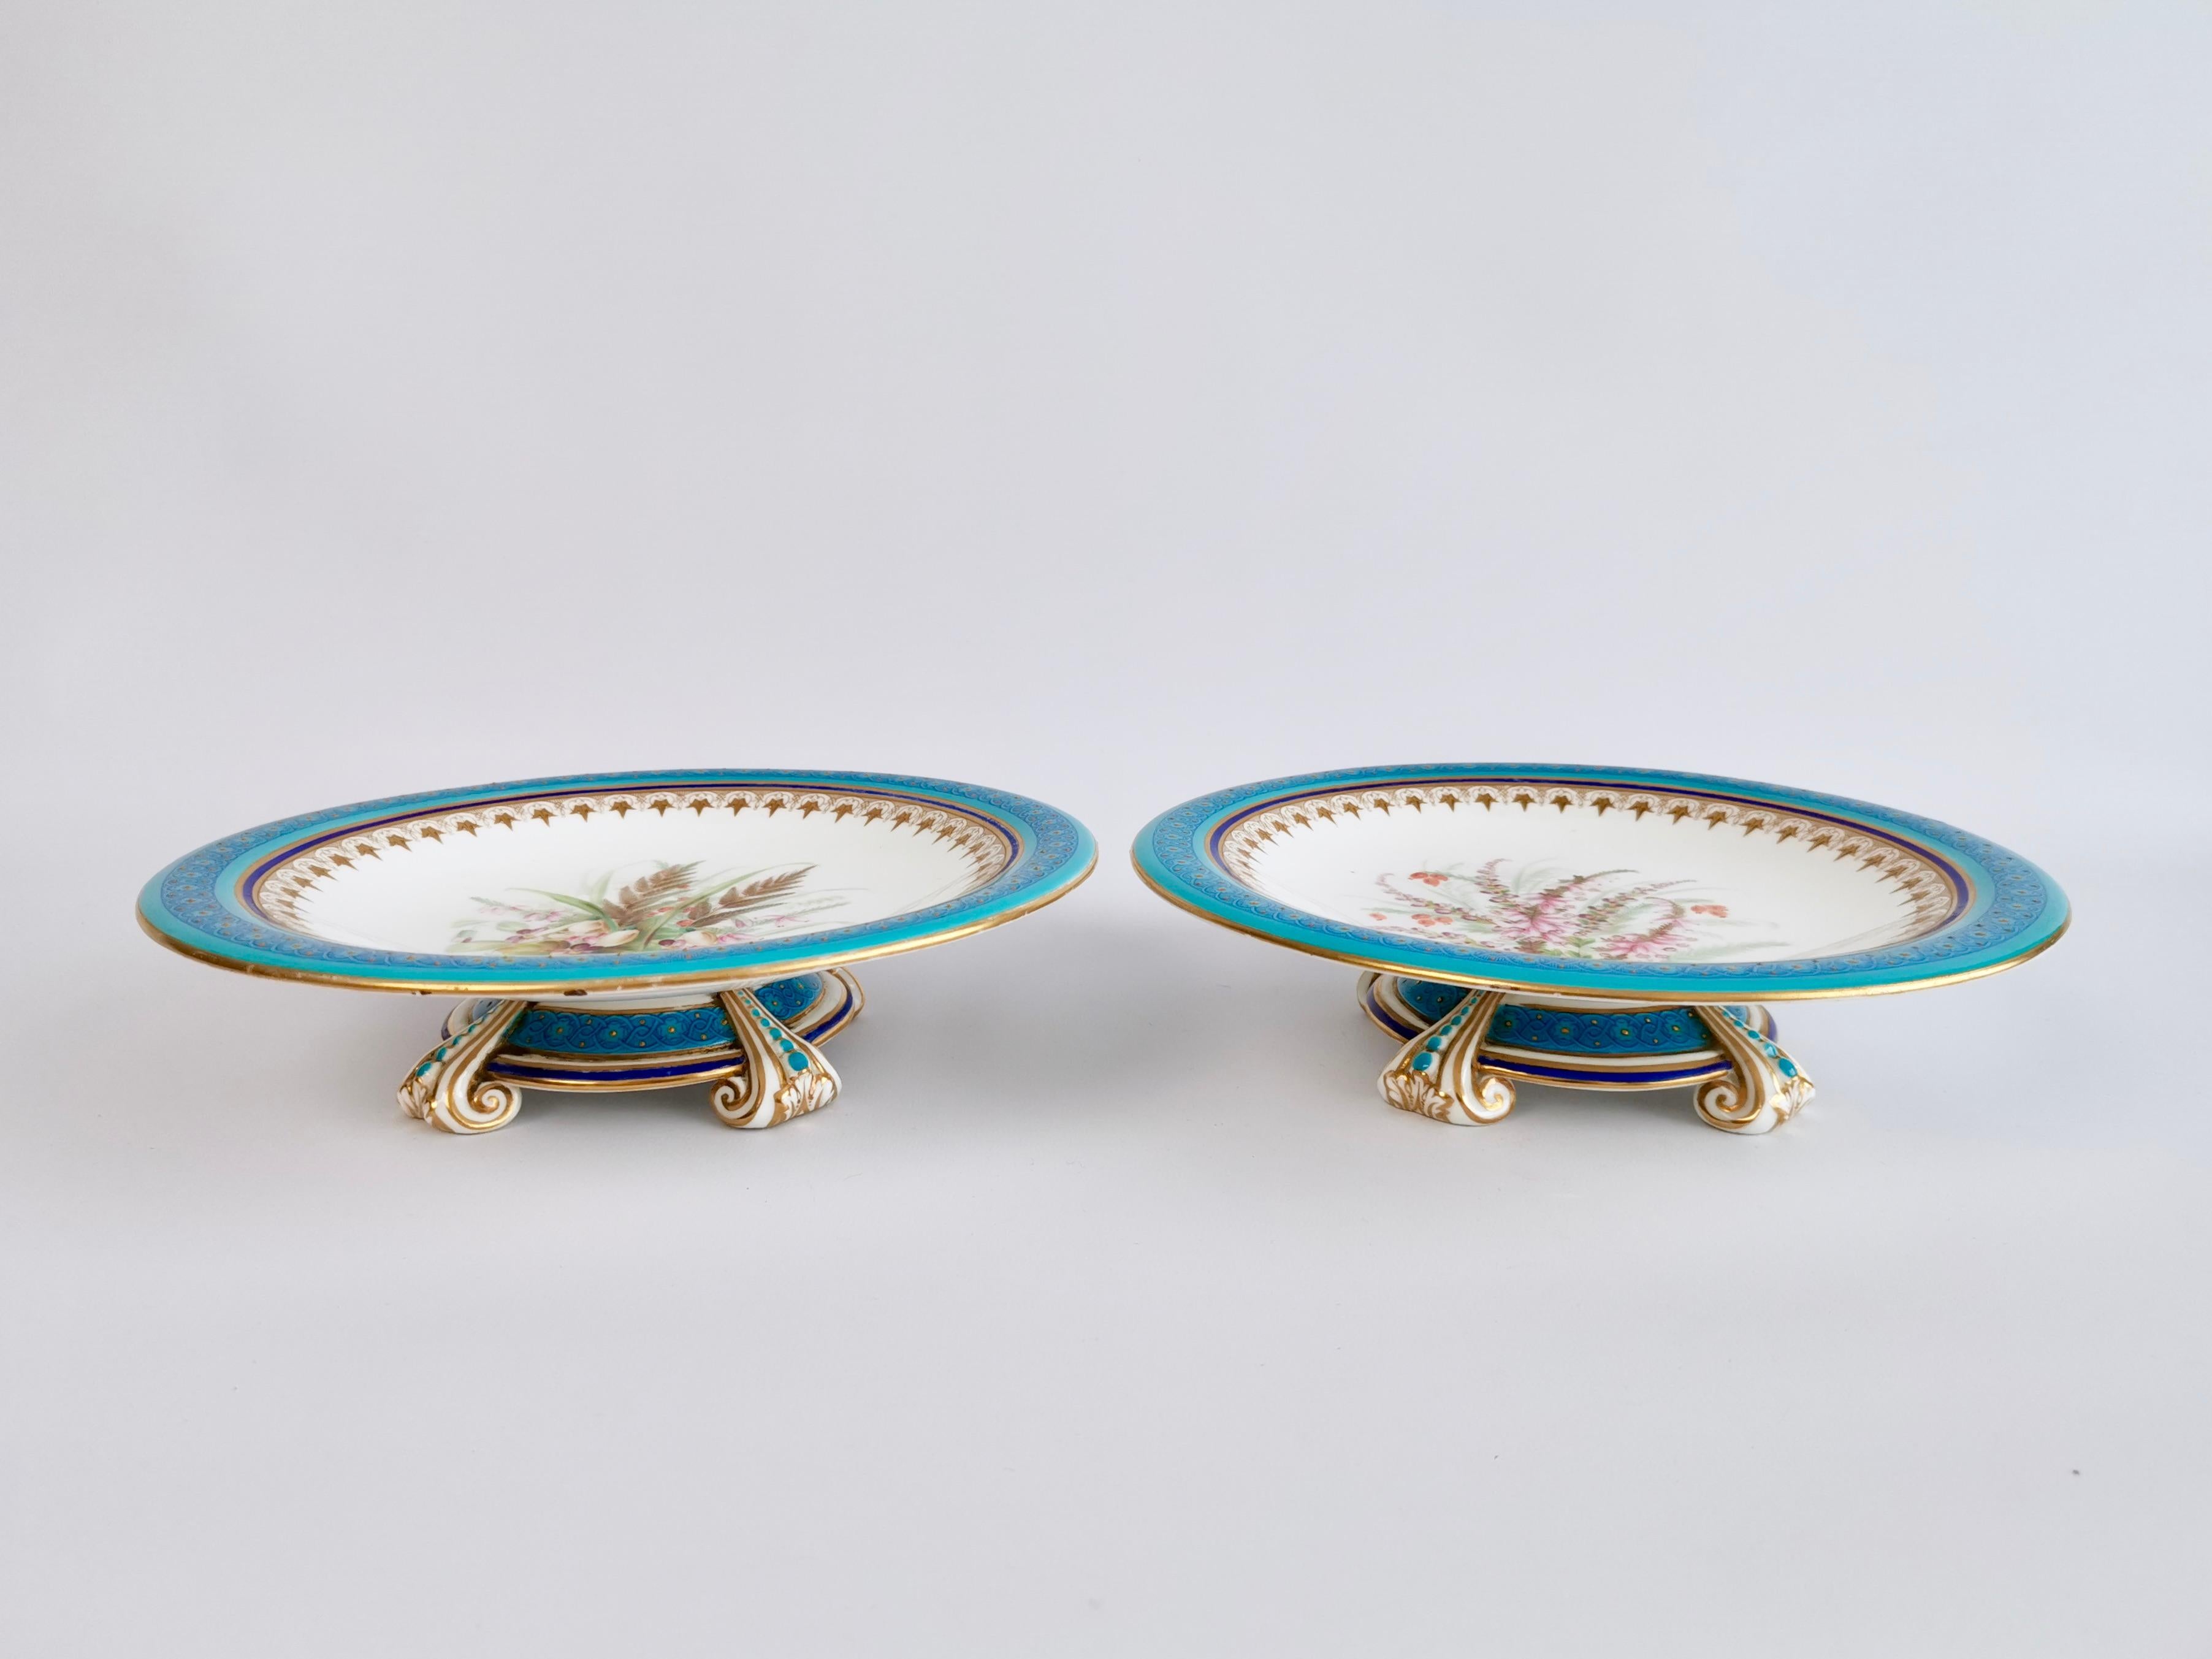 Royal Worcester Porcelain Dessert Service, Turquoise with Parian Cherubs, 1910 2